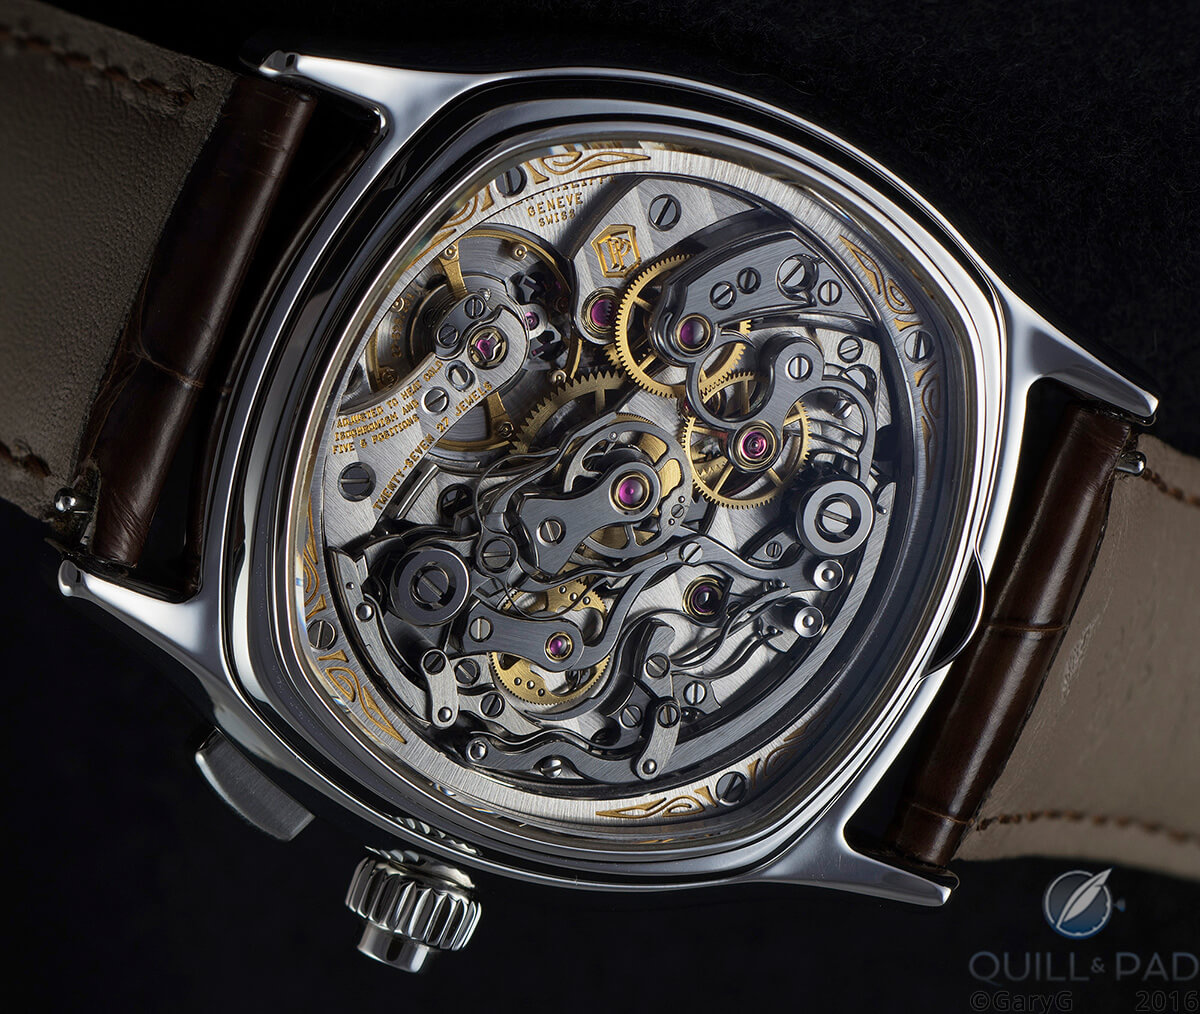 Behind the scenes: Caliber CHR 27-525 PS of Patek Philippe Reference 5950A-001